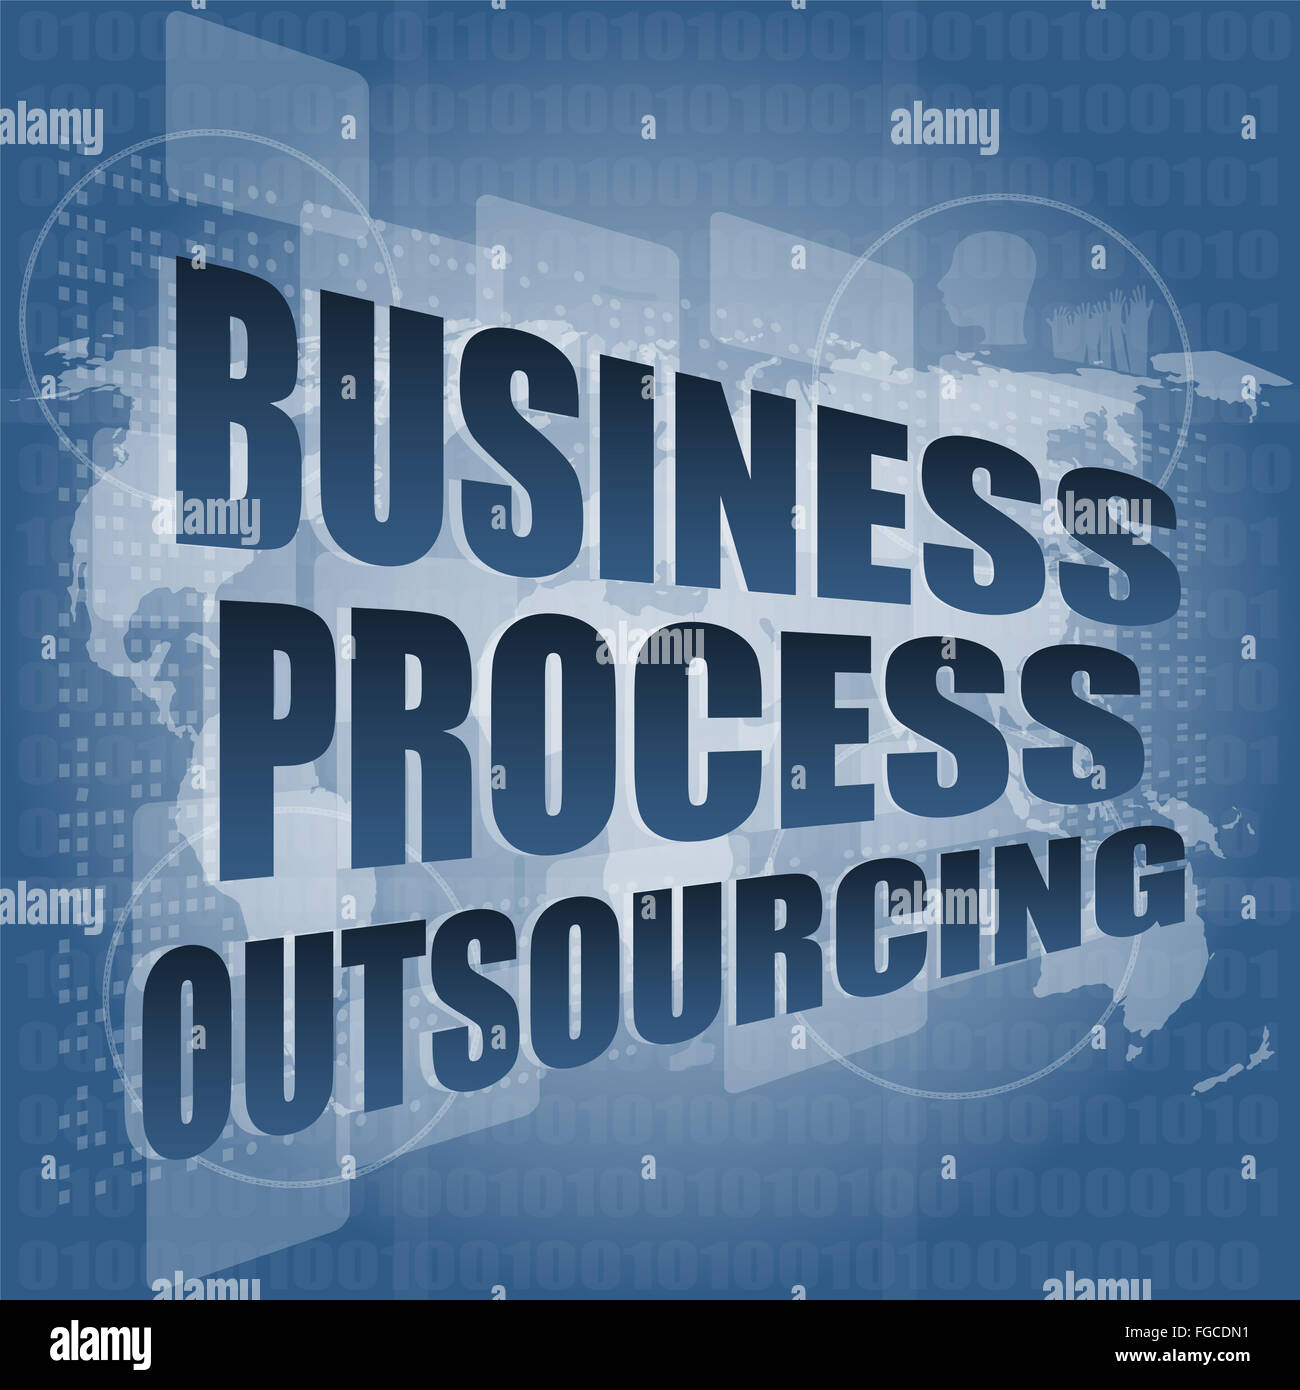 business process outsourcing interface hi technology Stock Photo